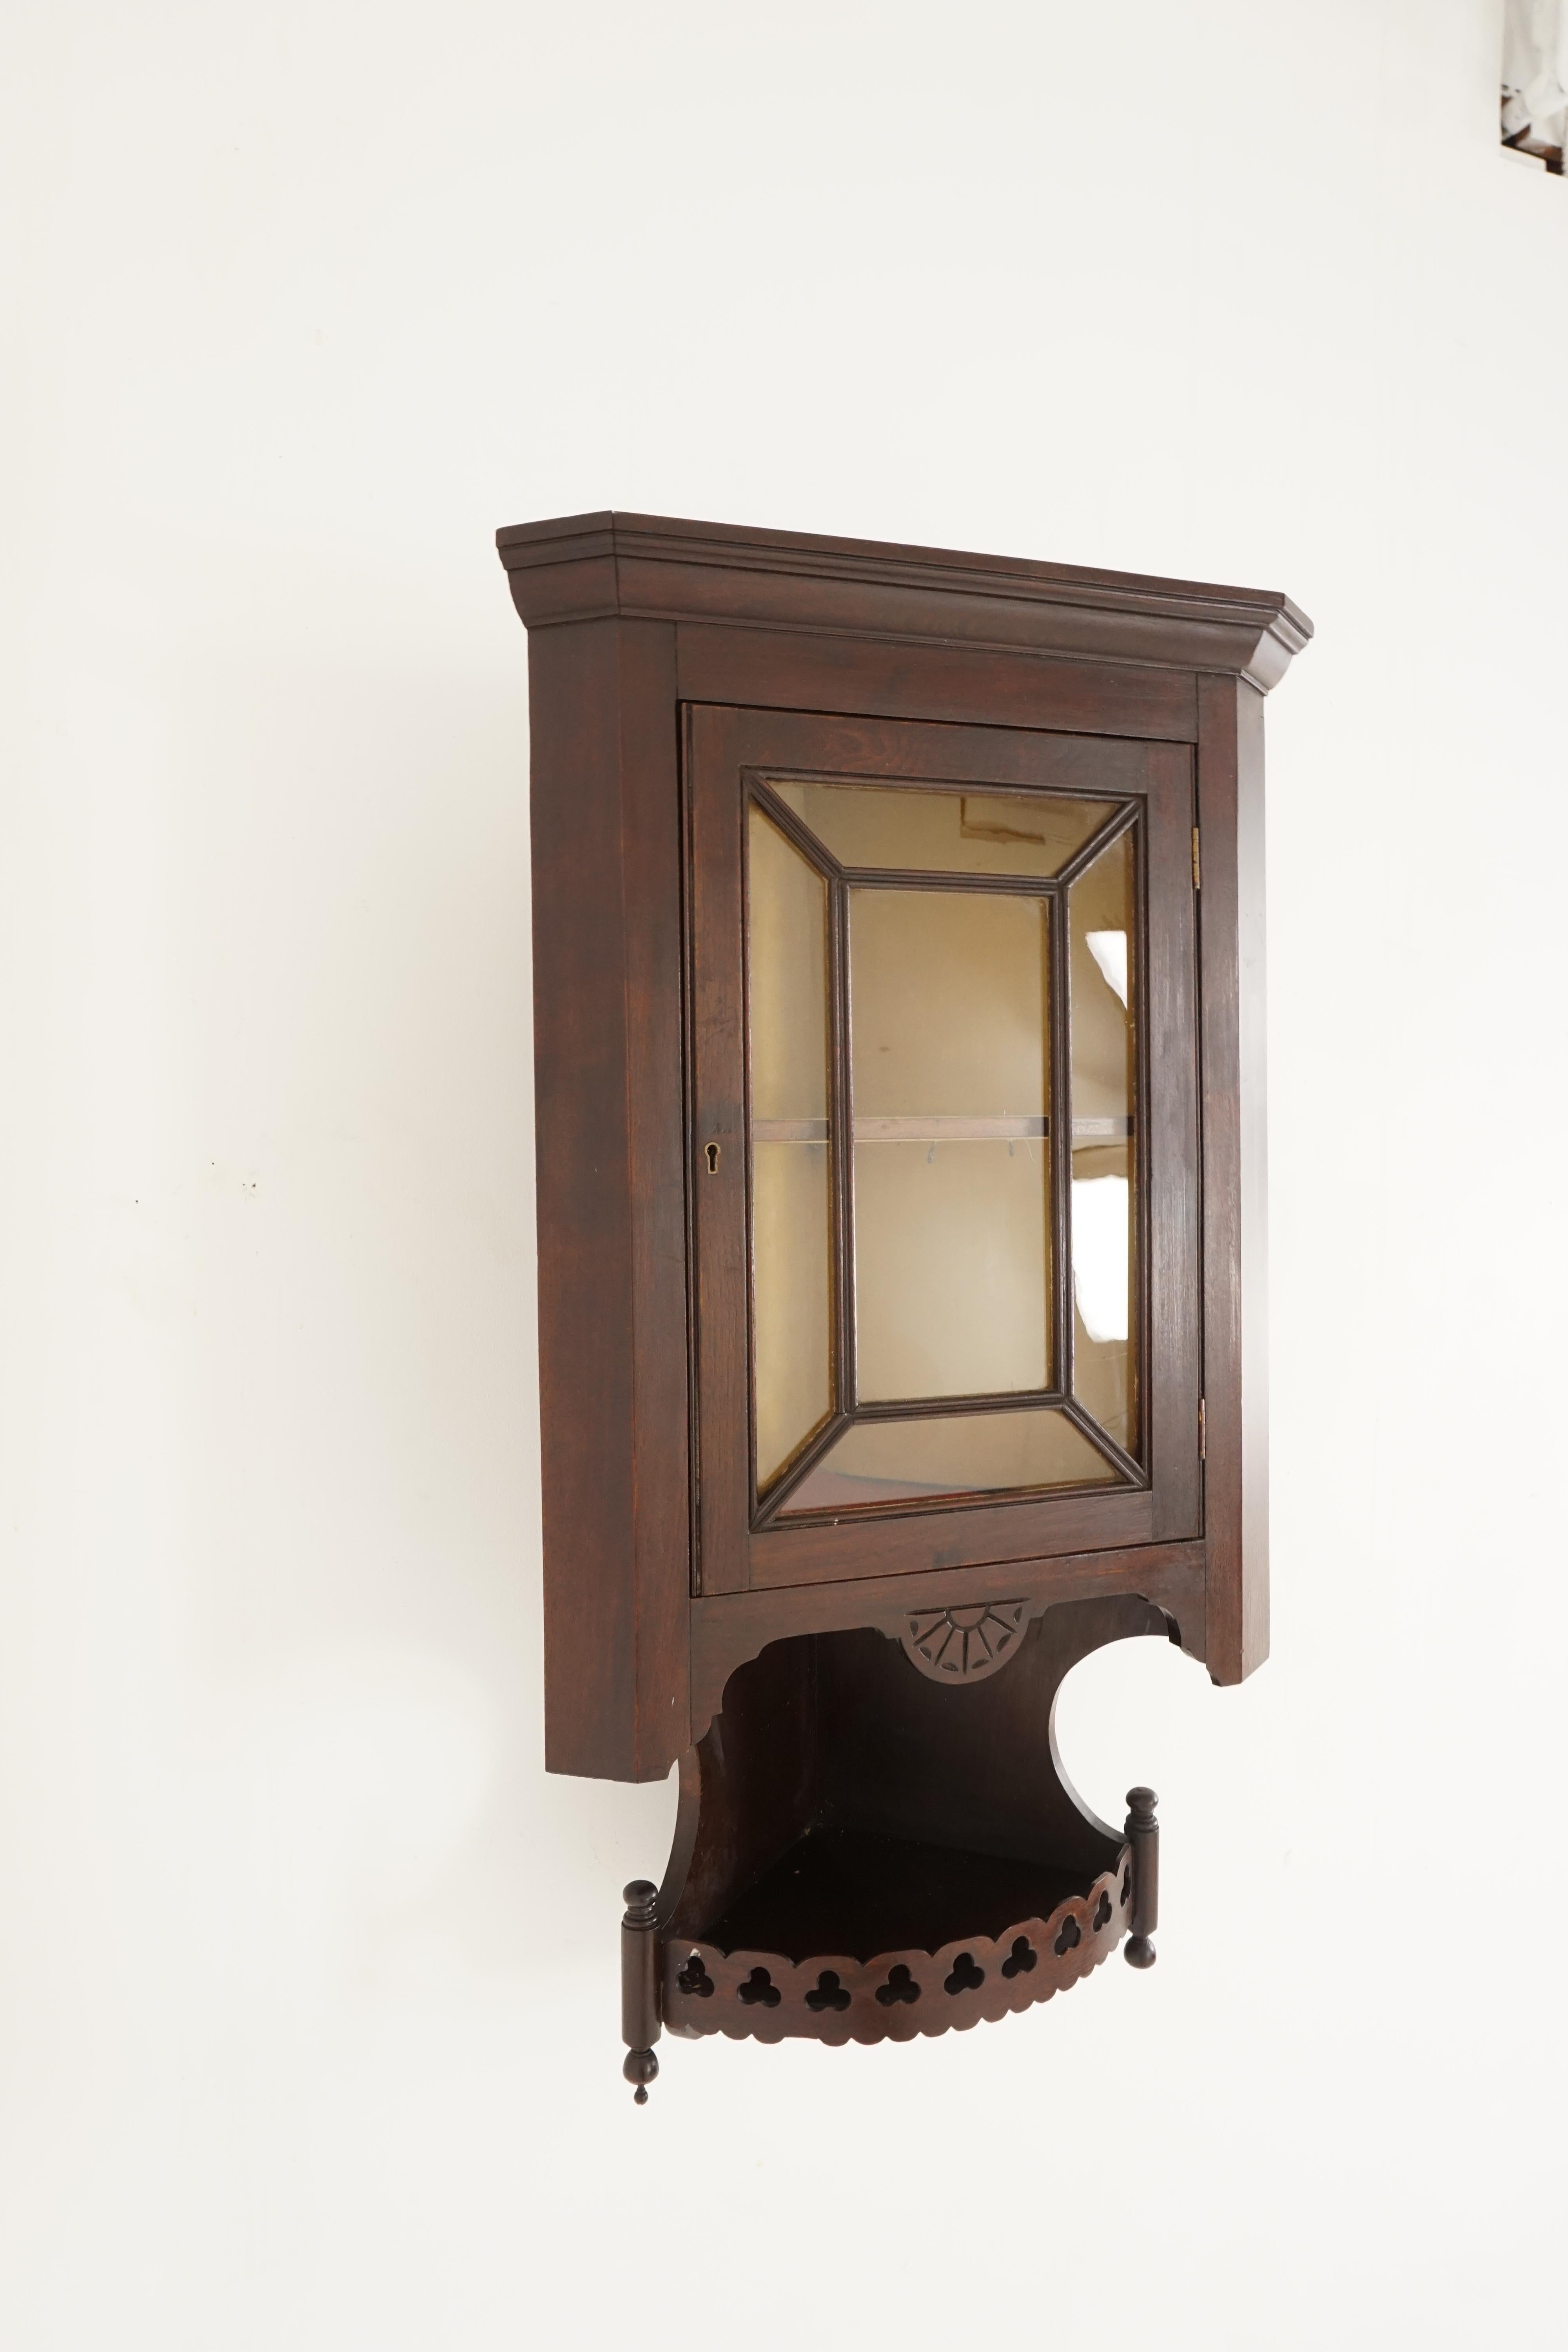 Hand-Crafted Antique Corner Cabinet, Walnut Display Cabinet, Hanging Glass Front, 1880s